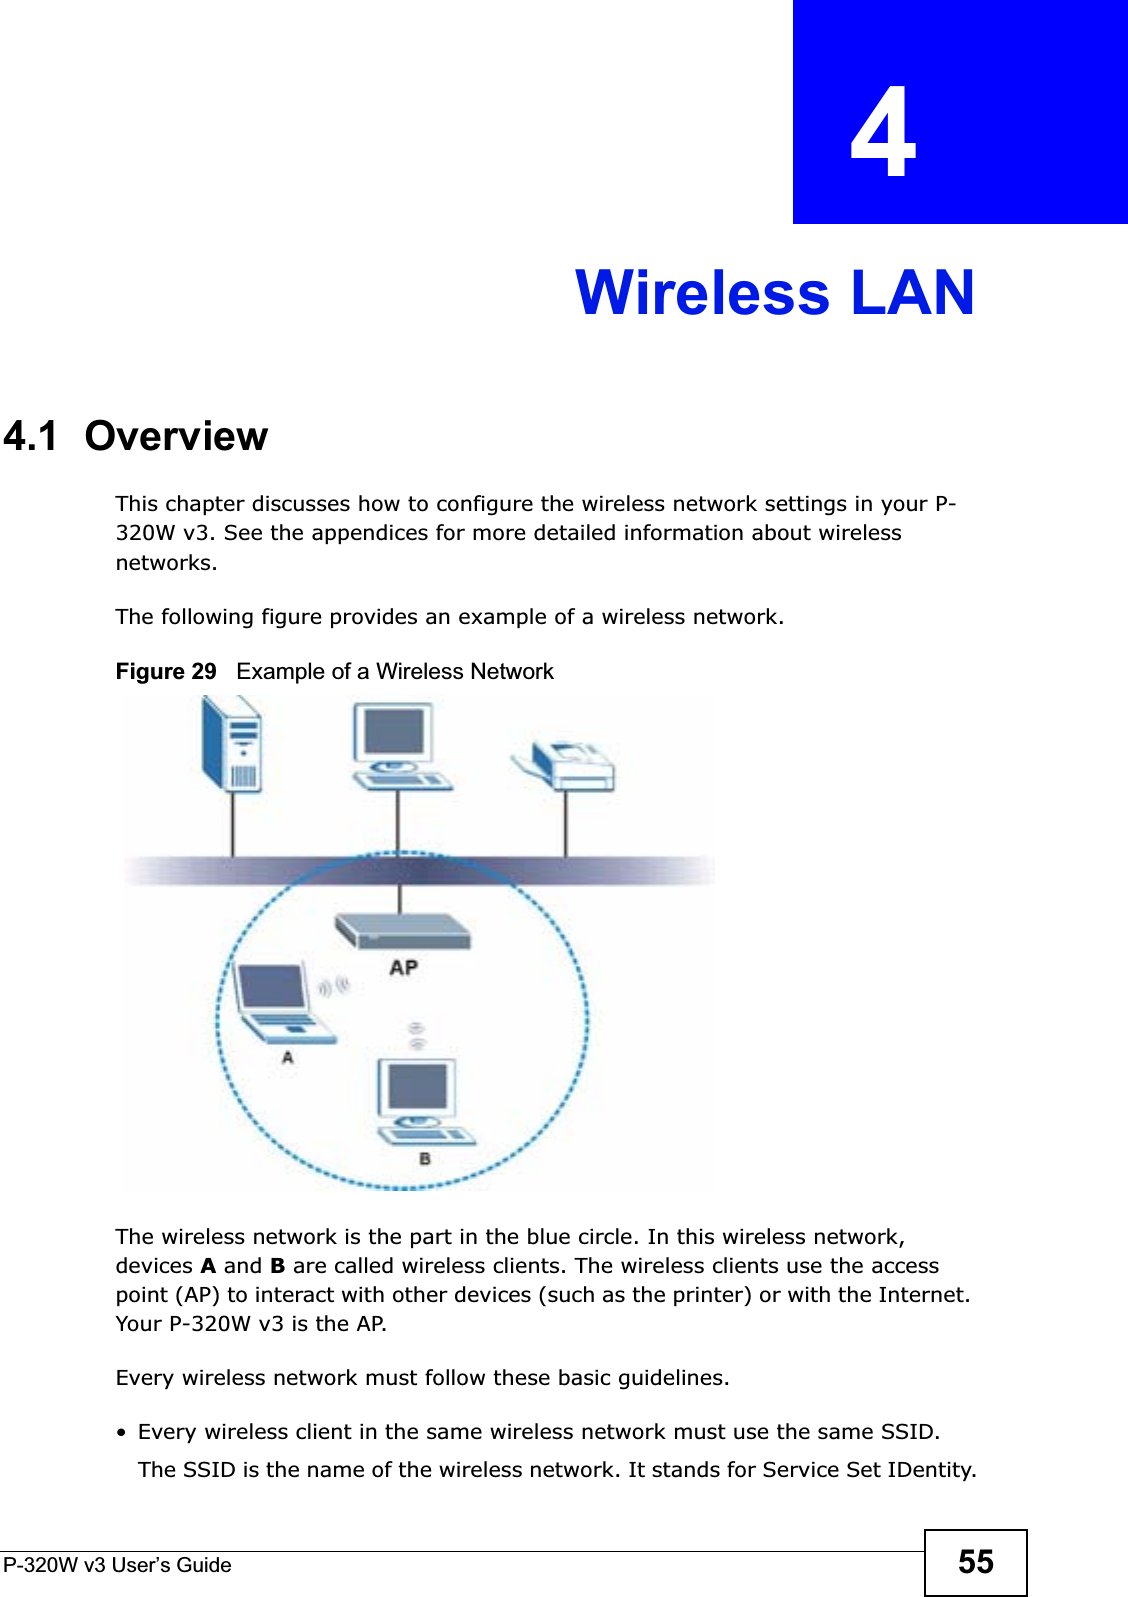 P-320W v3 User’s Guide 55CHAPTER  4 Wireless LAN4.1  OverviewThis chapter discusses how to configure the wireless network settings in your P-320W v3. See the appendices for more detailed information about wireless networks.The following figure provides an example of a wireless network.Figure 29   Example of a Wireless NetworkThe wireless network is the part in the blue circle. In this wireless network, devices A and B are called wireless clients. The wireless clients use the access point (AP) to interact with other devices (such as the printer) or with the Internet. Your P-320W v3 is the AP.Every wireless network must follow these basic guidelines.• Every wireless client in the same wireless network must use the same SSID.The SSID is the name of the wireless network. It stands for Service Set IDentity.